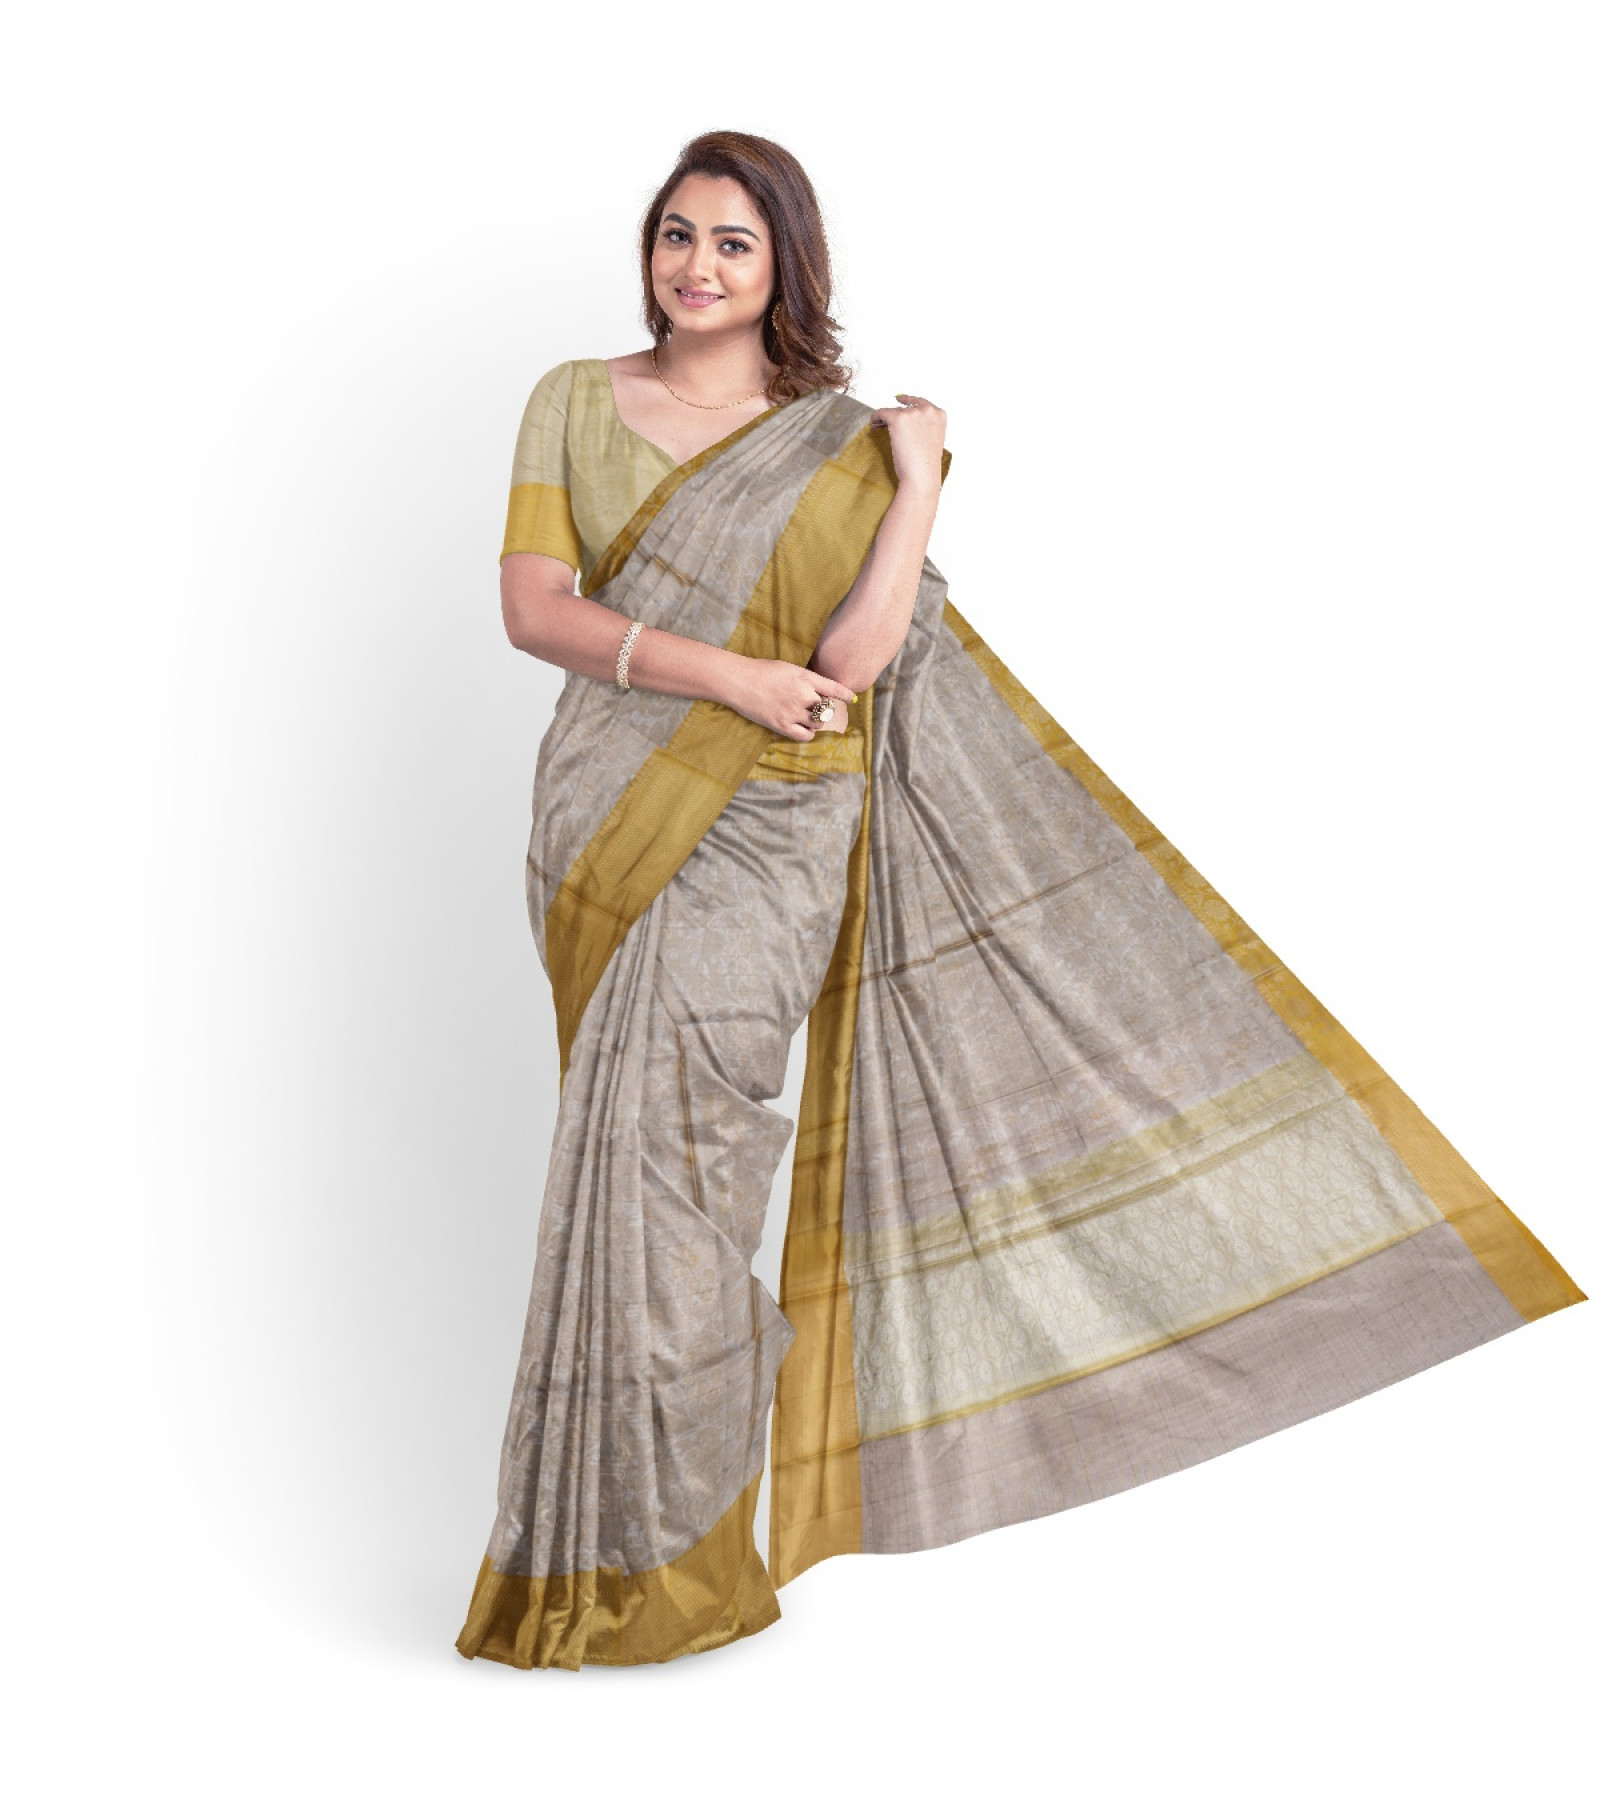 Exclusive Half White Embroidered Tussar Saree by Abaranji 